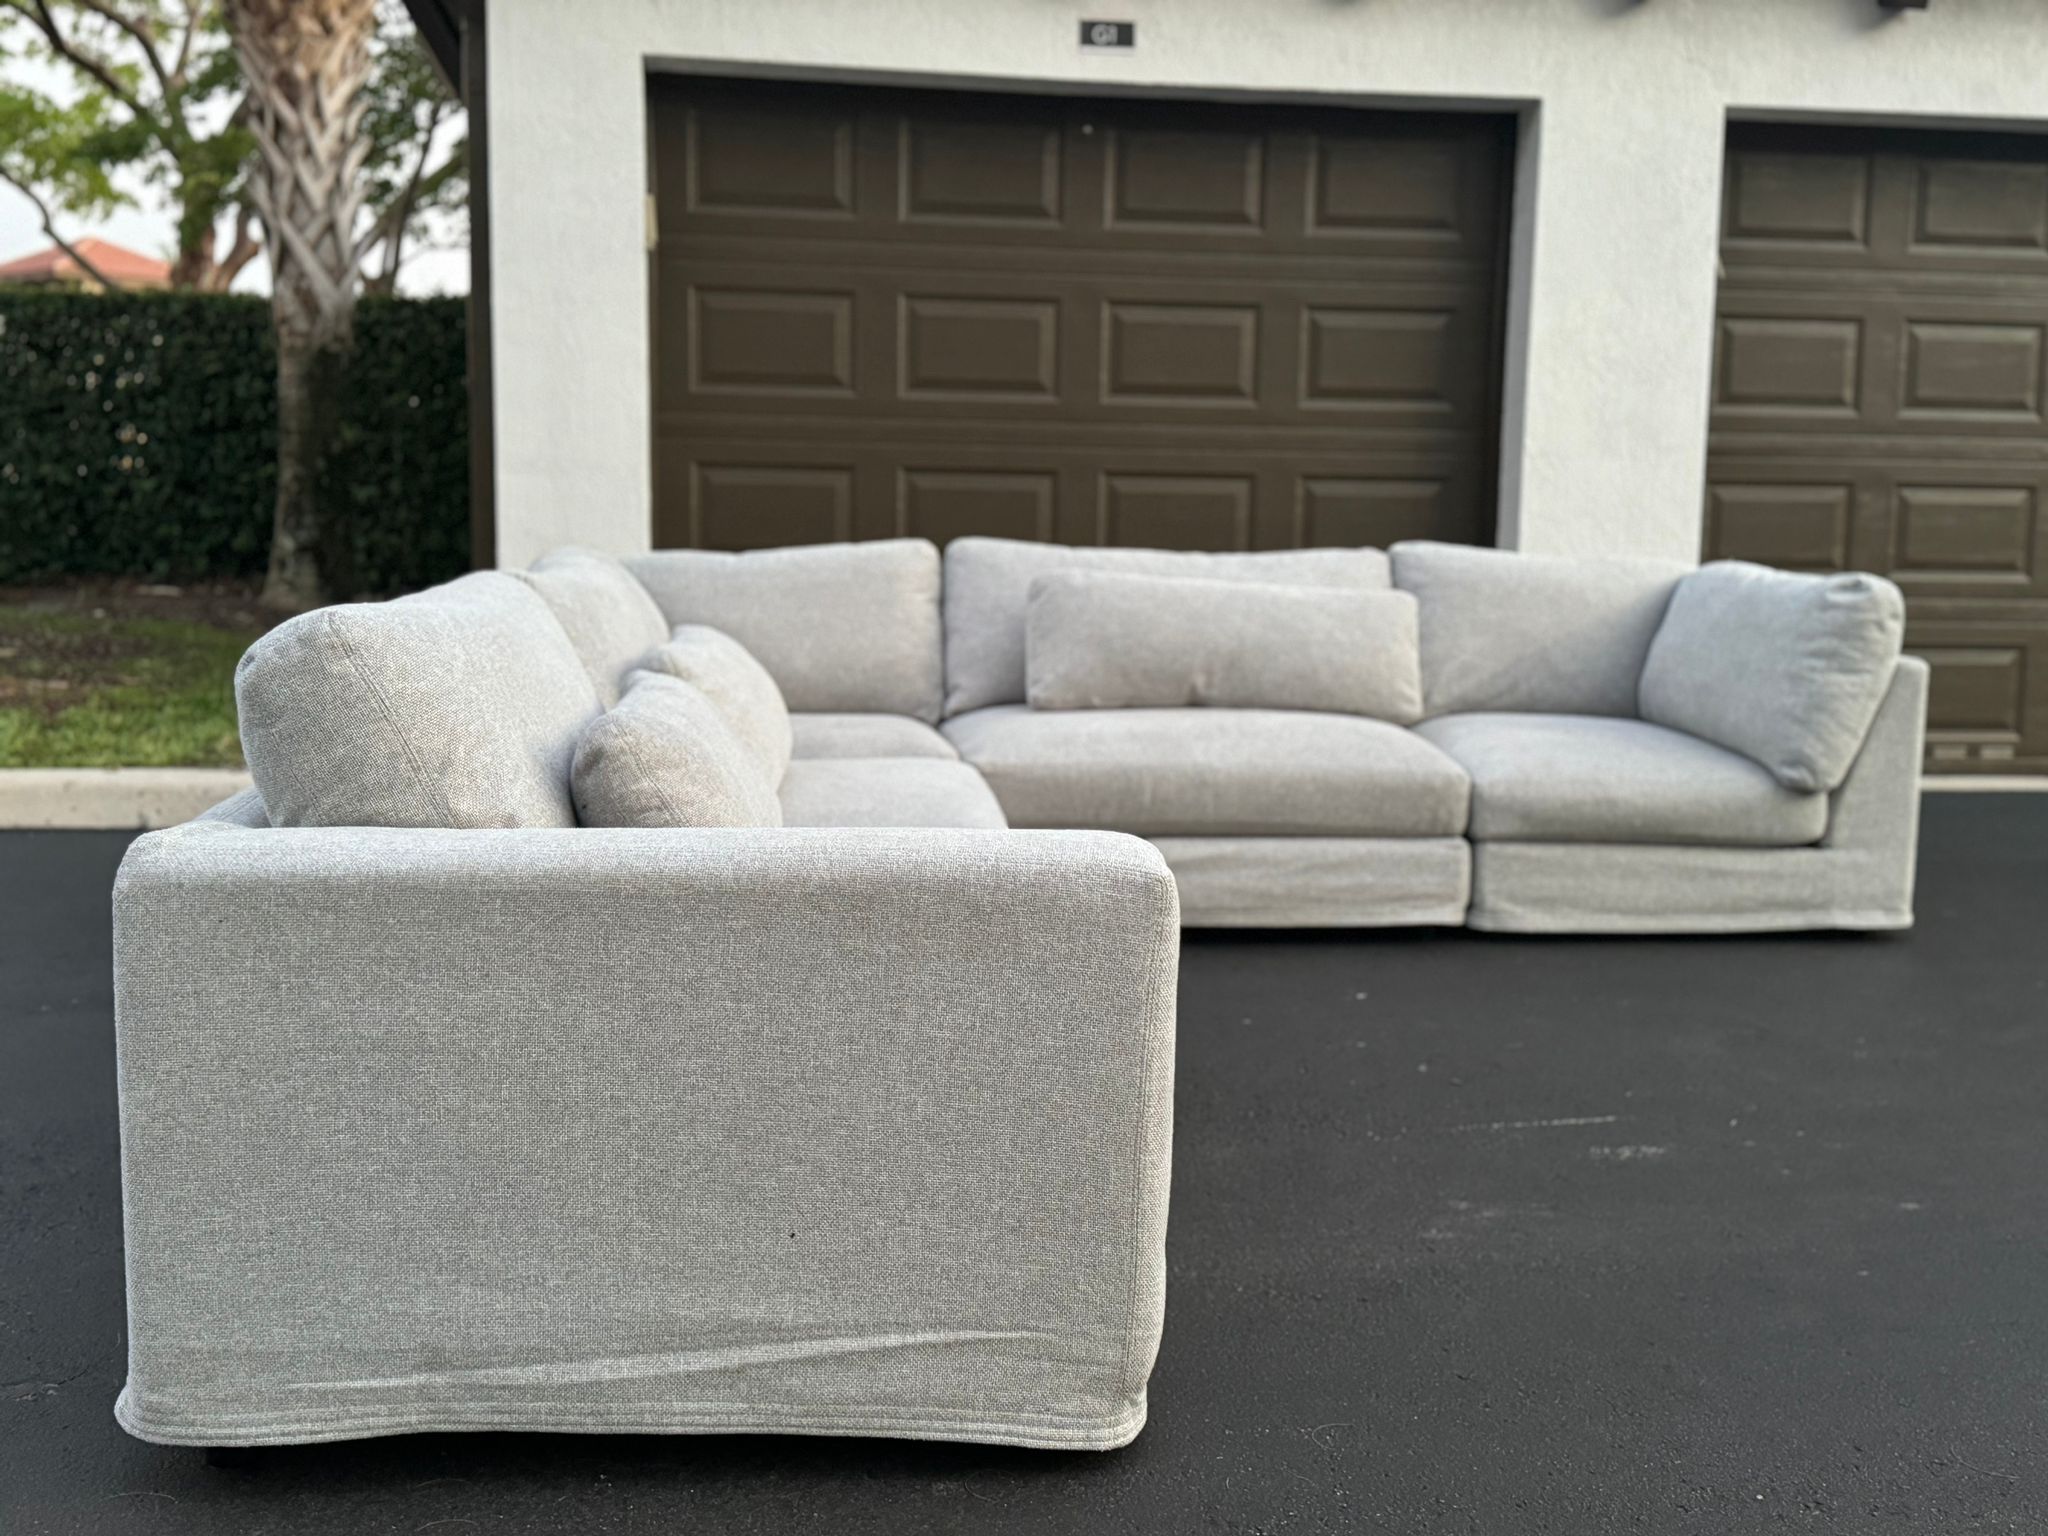 Sofa/Couch Sectional - Like New - Gray - Modular - Linen - Delivery Available 🚚